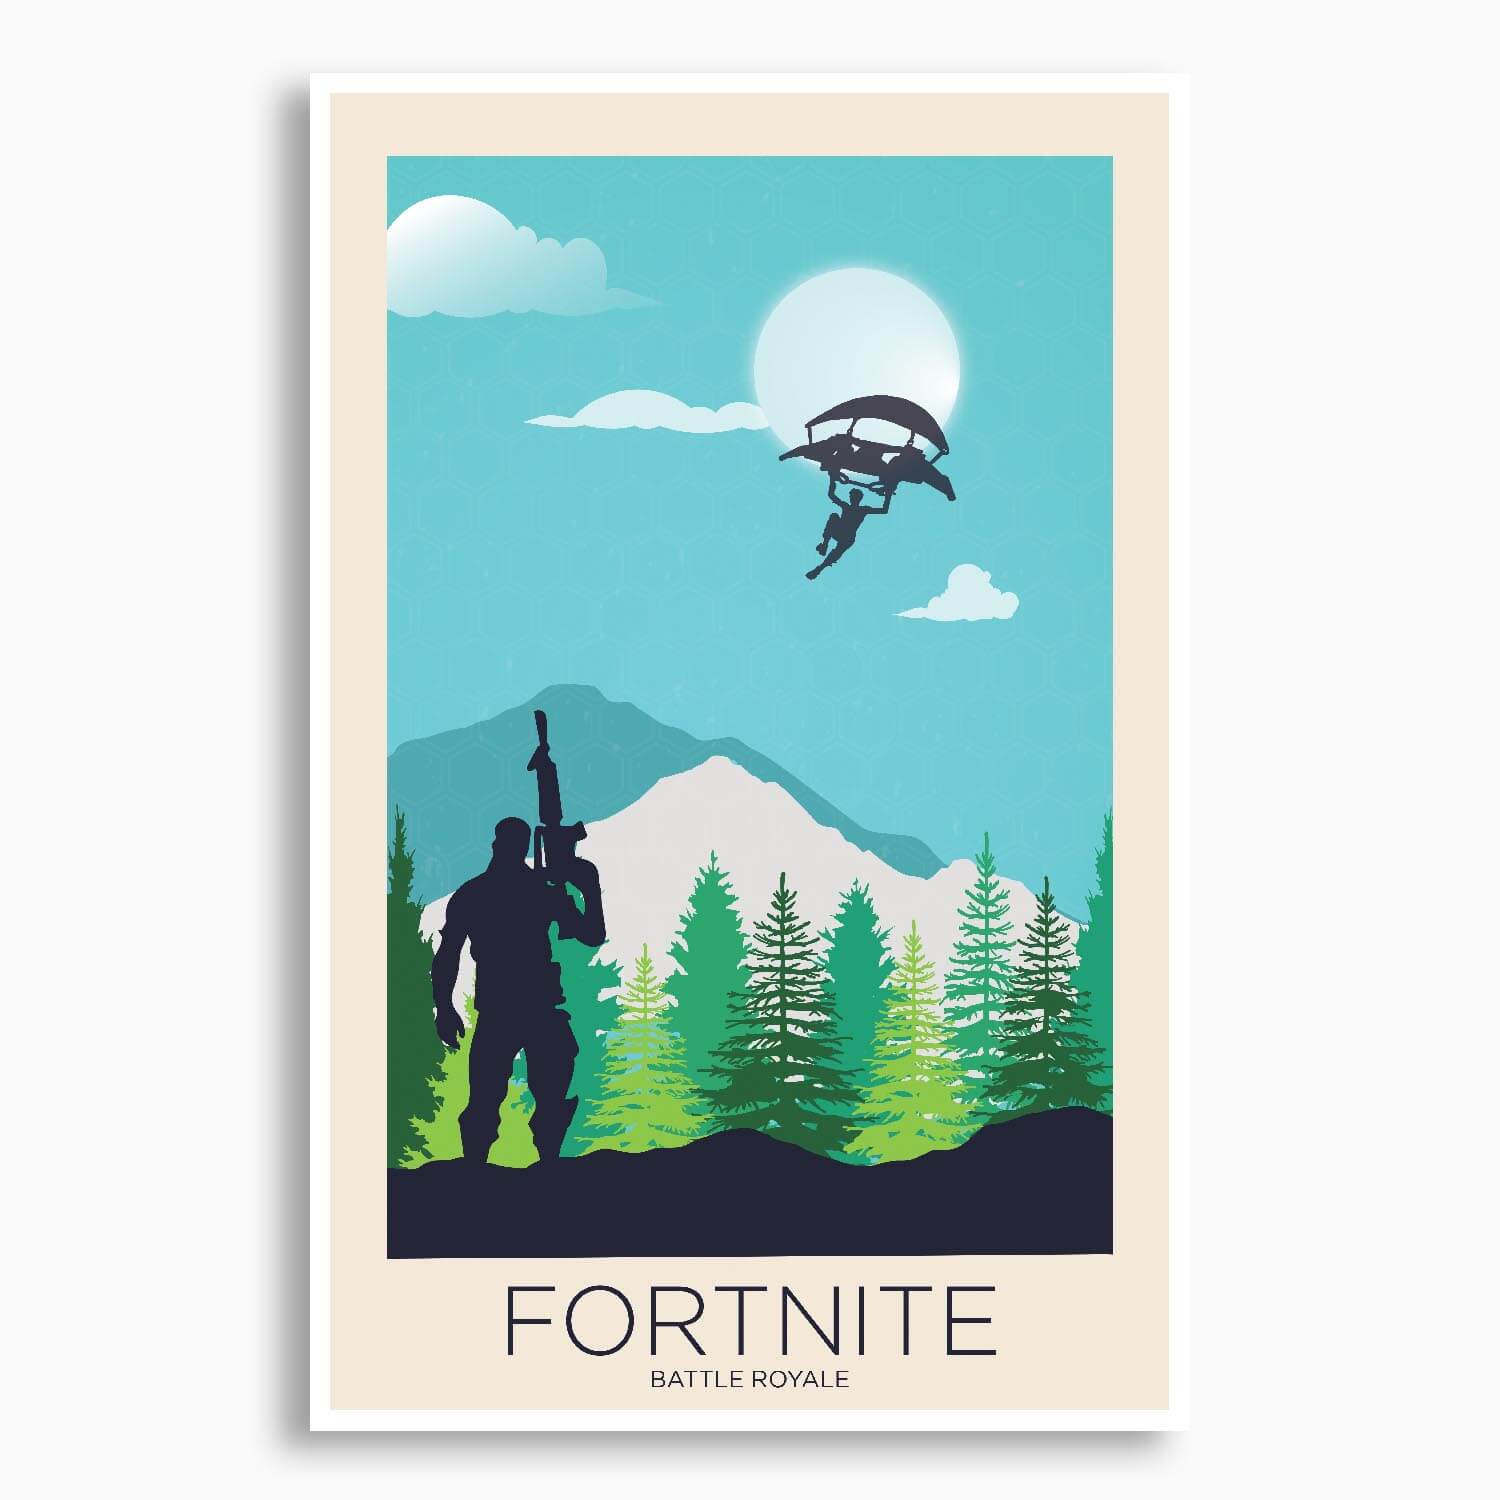 Fortnite Battle Royale Poster SIZE A3 Free Postage